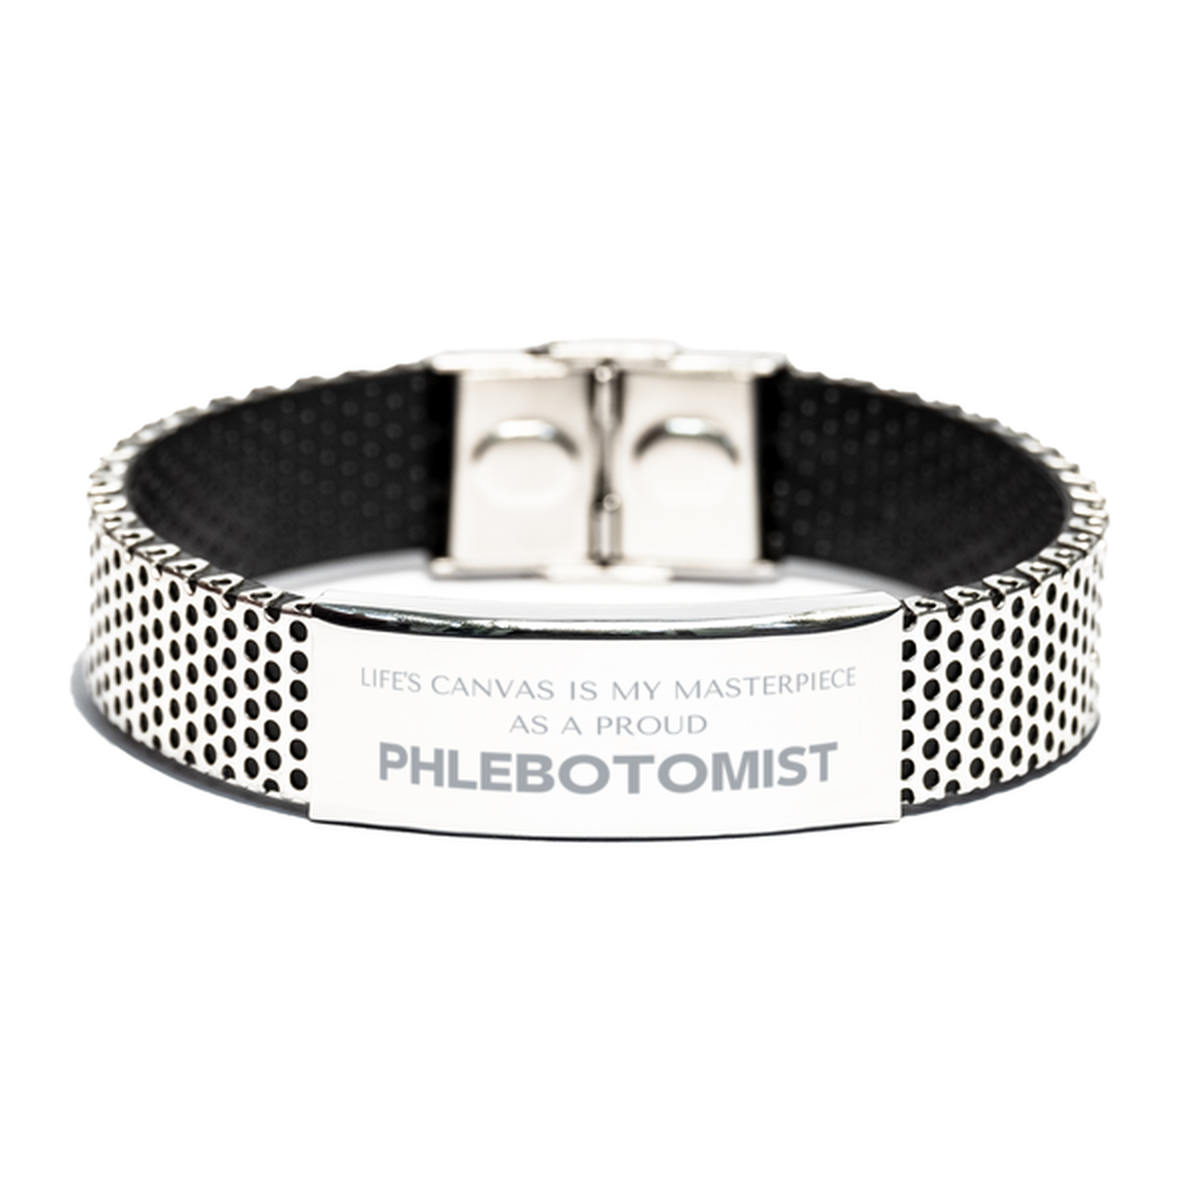 Proud Phlebotomist Gifts, Life's canvas is my masterpiece, Epic Birthday Christmas Unique Stainless Steel Bracelet For Phlebotomist, Coworkers, Men, Women, Friends